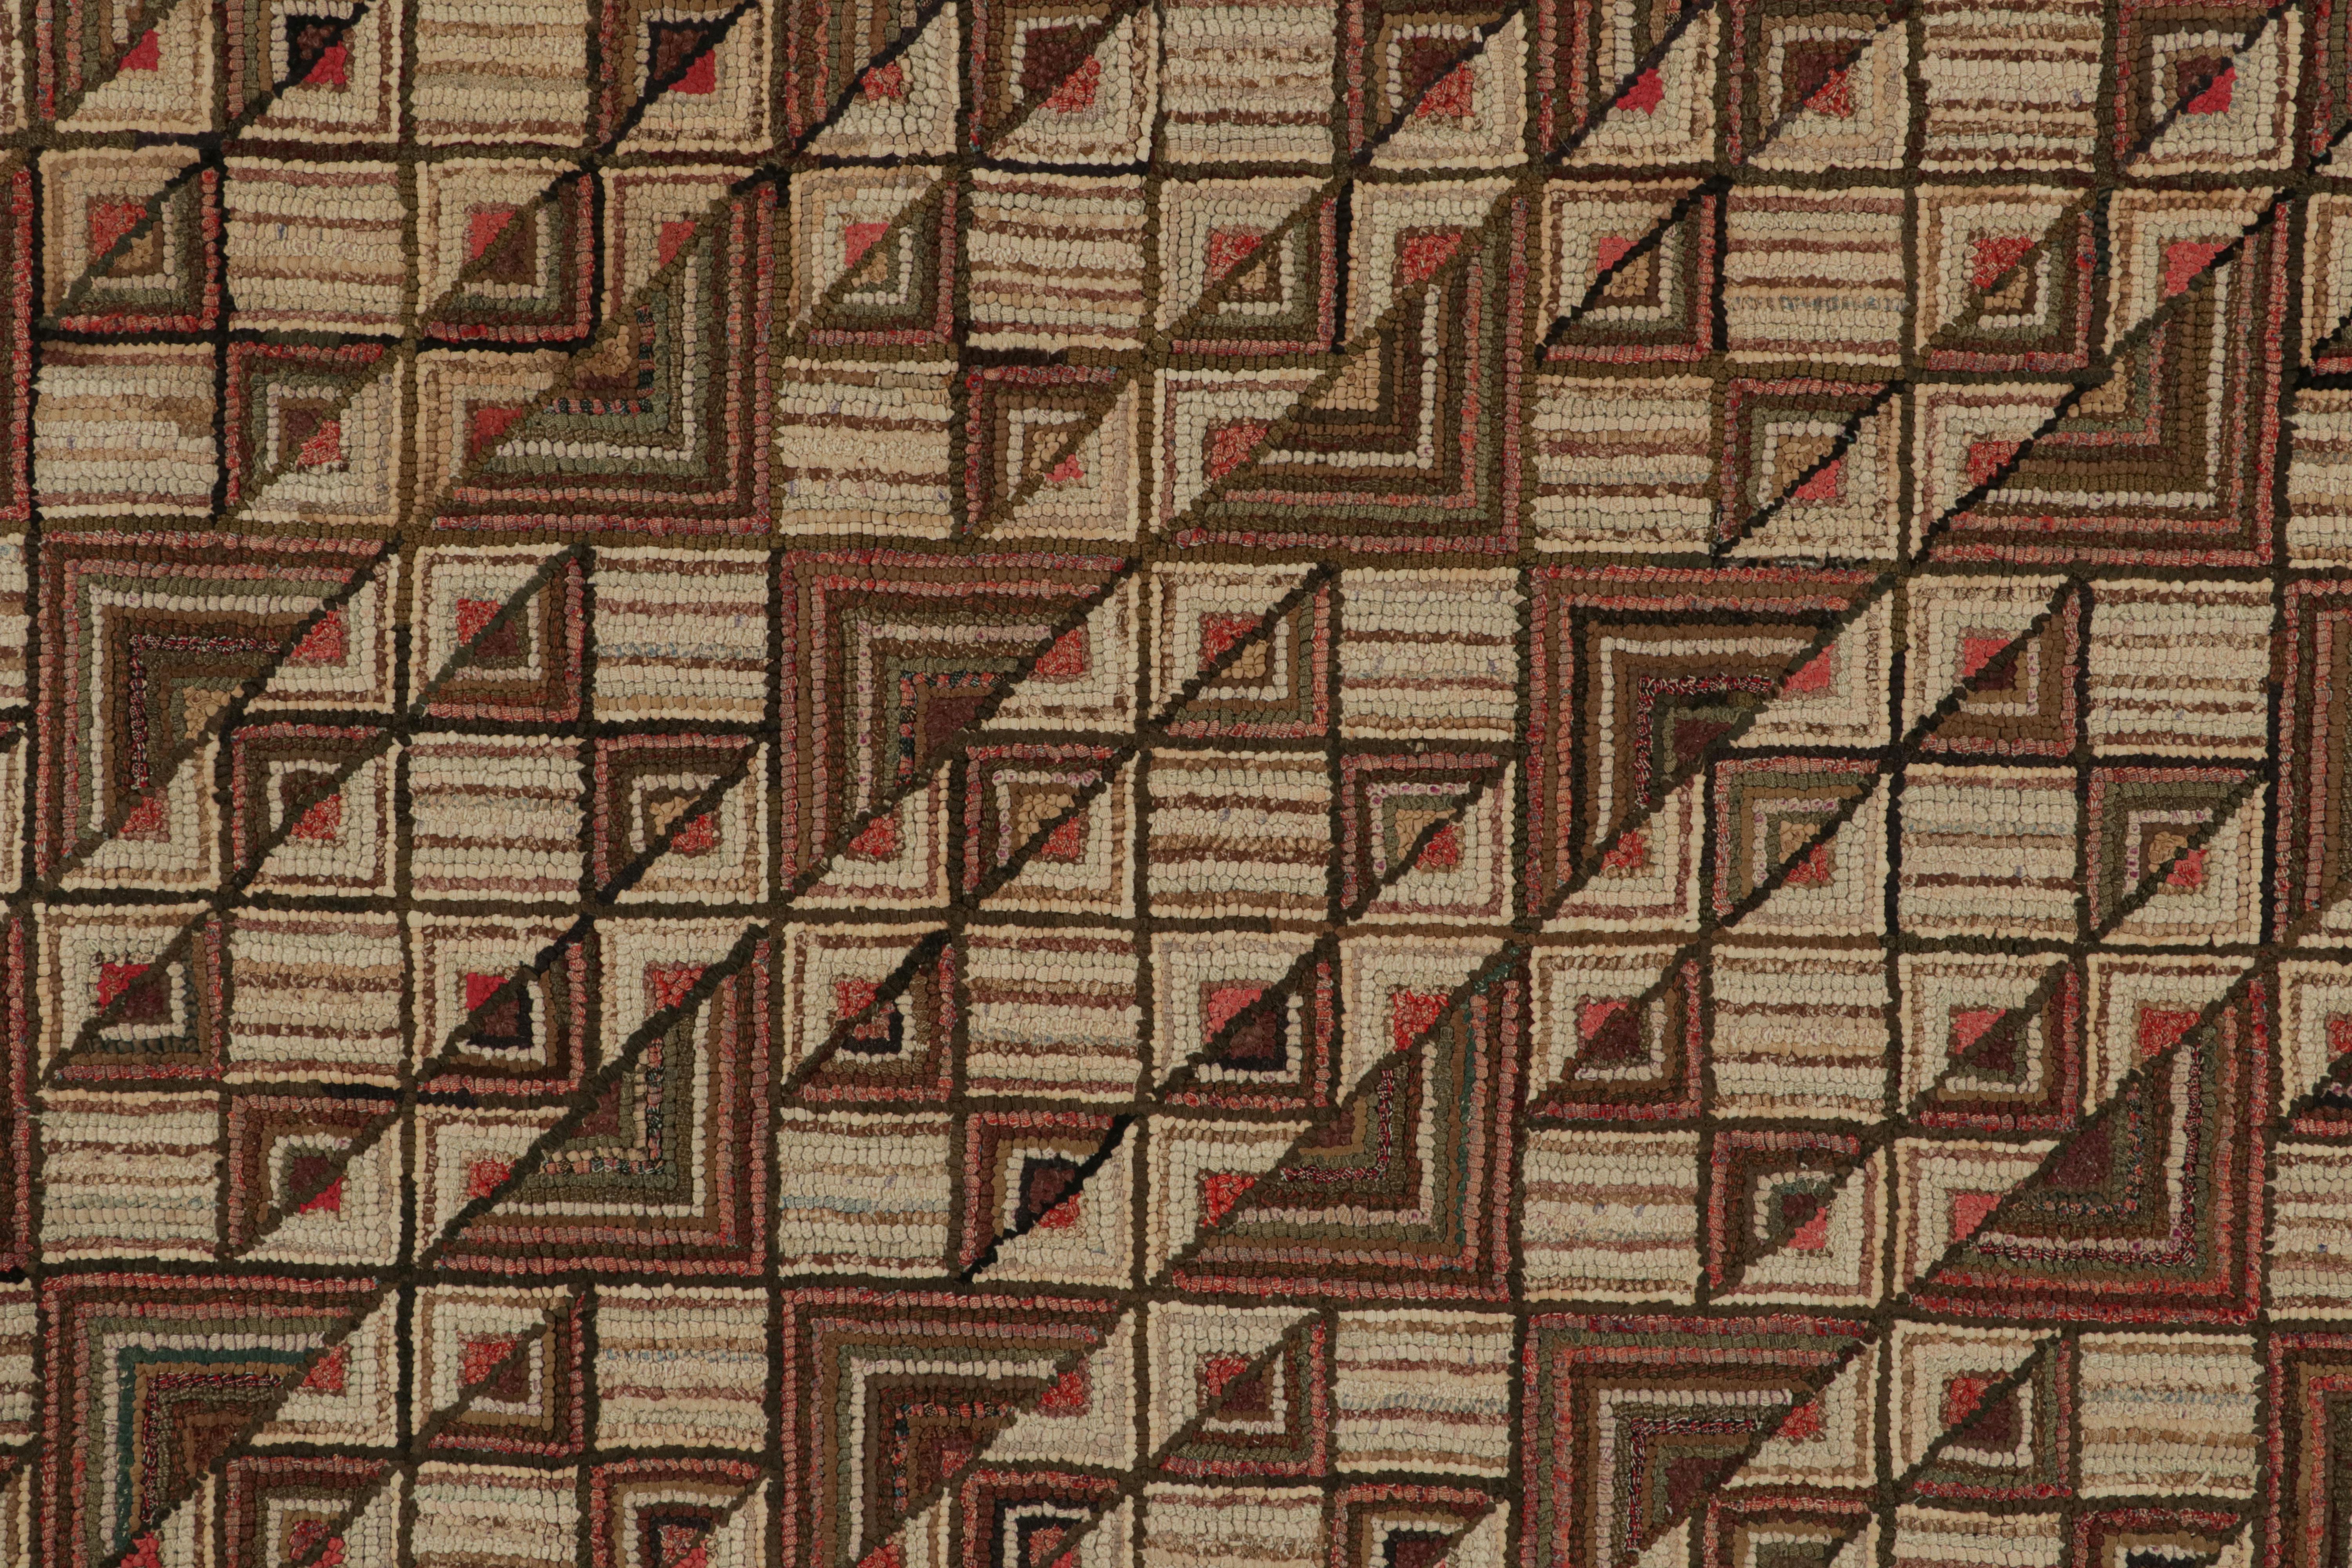 Mid-17th Century Antique Hooked Rug with Beige-Brown Geometric Patterns, from Rug & Kilim For Sale